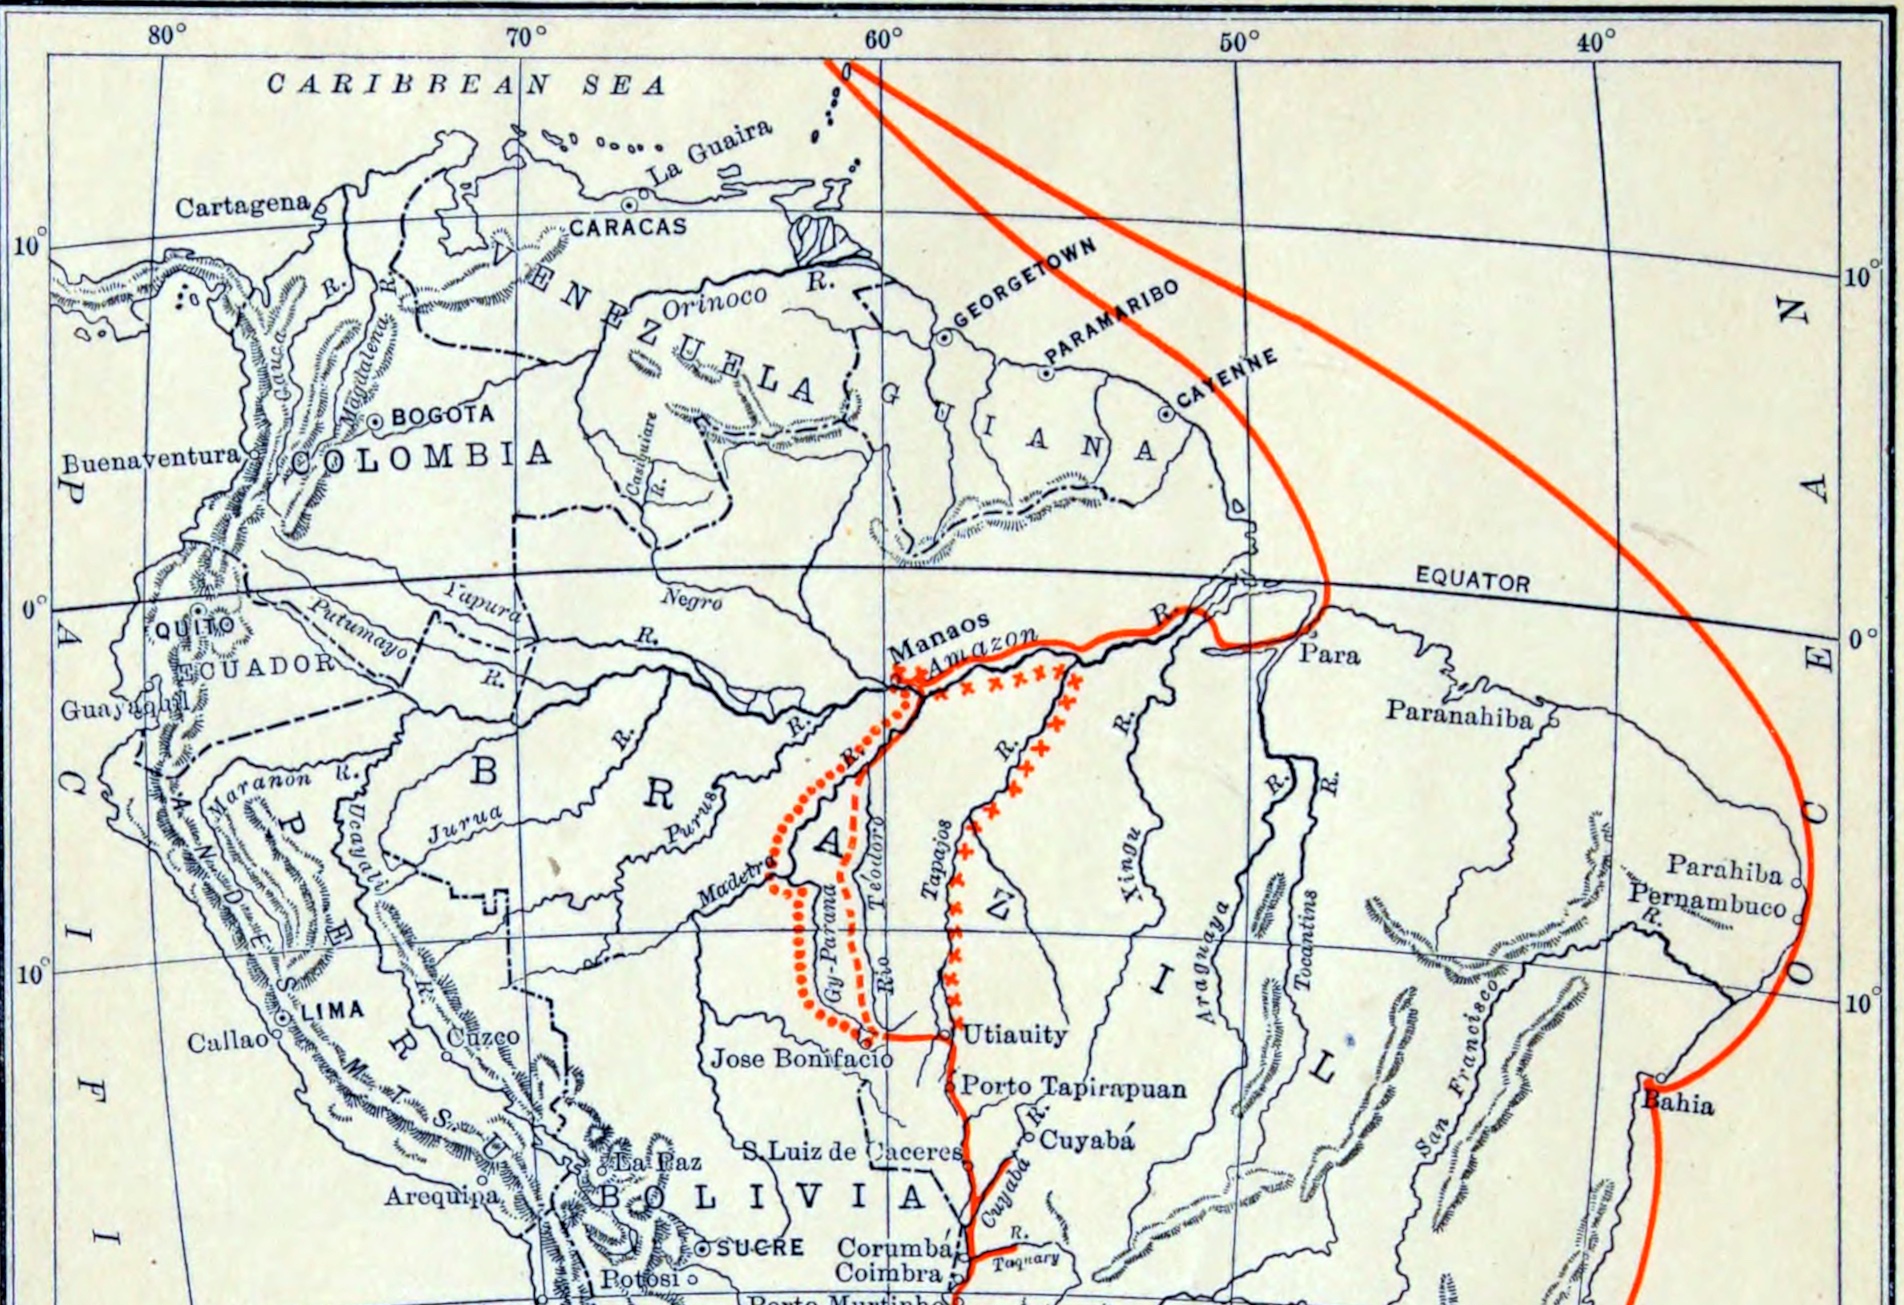 Part of the source map of Brazil showing both black and red linework.